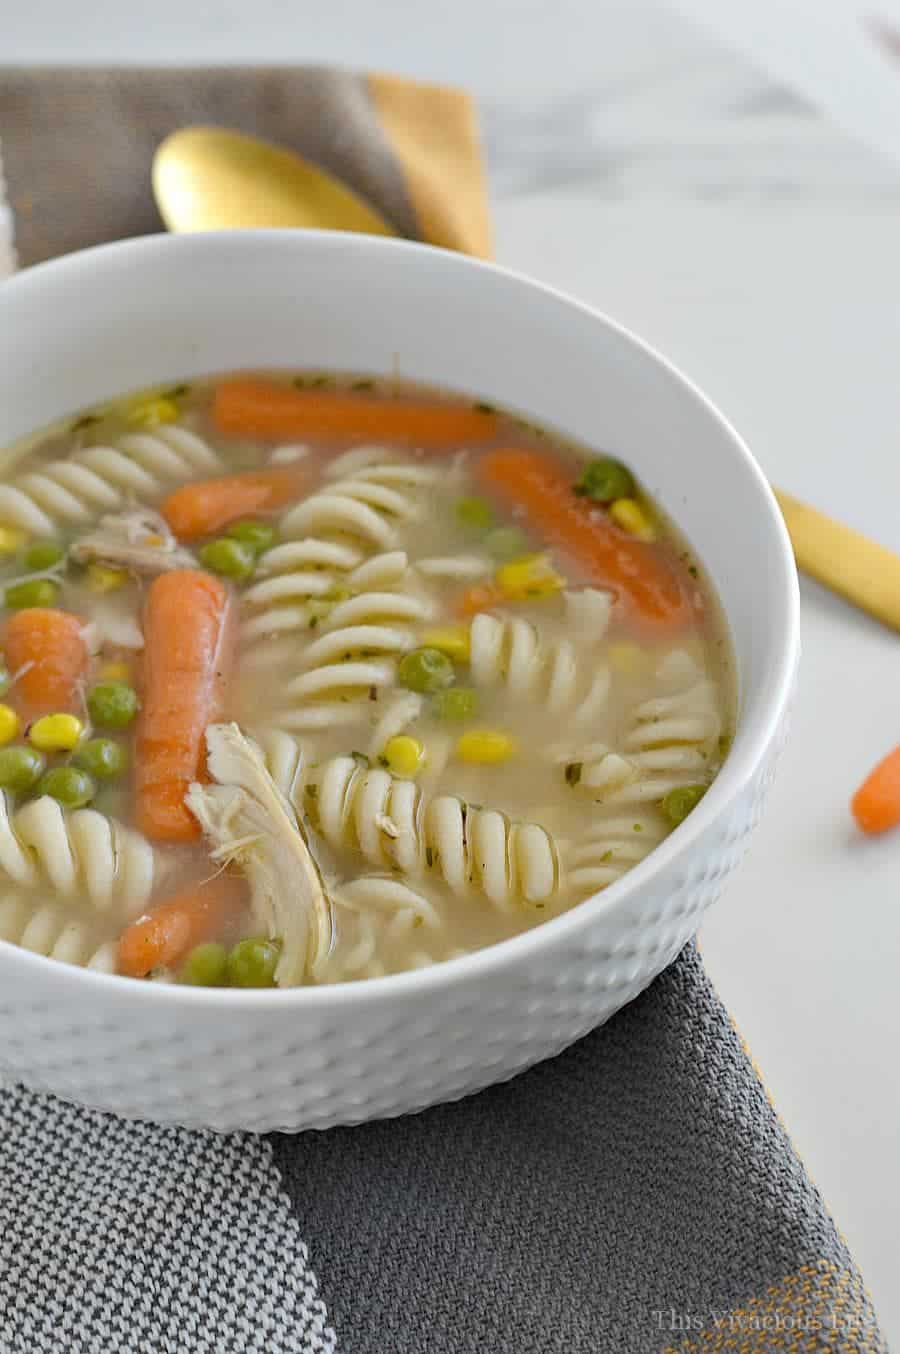 This gluten-free chicken noodle soup is the best recipe around. It is homemade and oh so delicious! | gluten-free soup recipes | easy gluten-free soup recipes | homemade soup recipes | healthy chicken noodle soup | easy chicken noodle soup || This Vivacious Life #glutenfreesoup #chickennoodlesoup #souprecipes